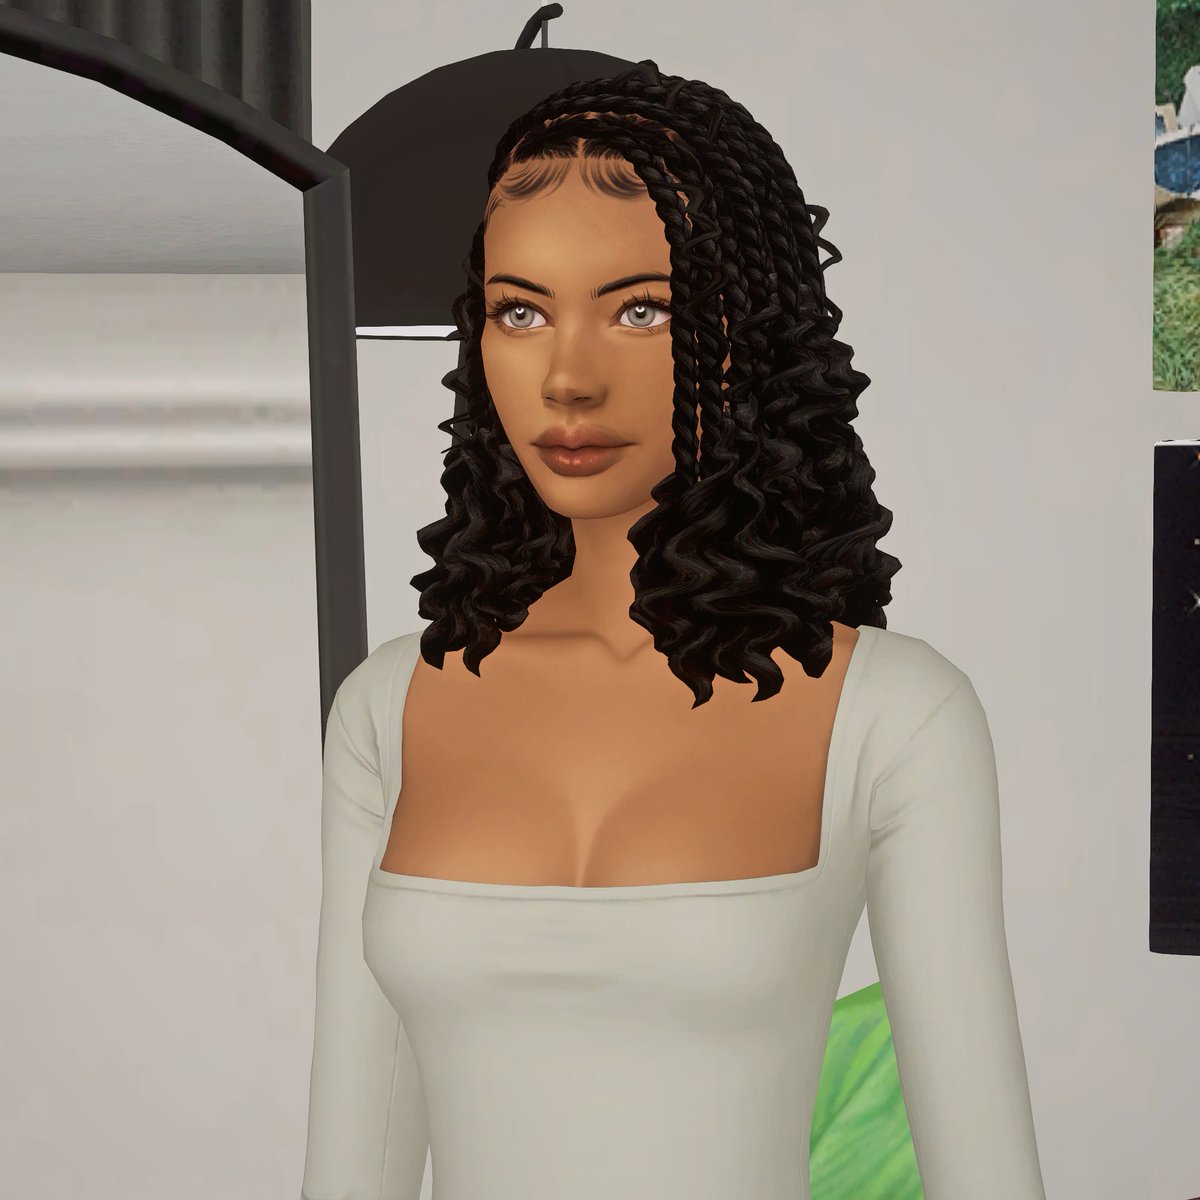 gegesims is always gonna take it for black MM hairs